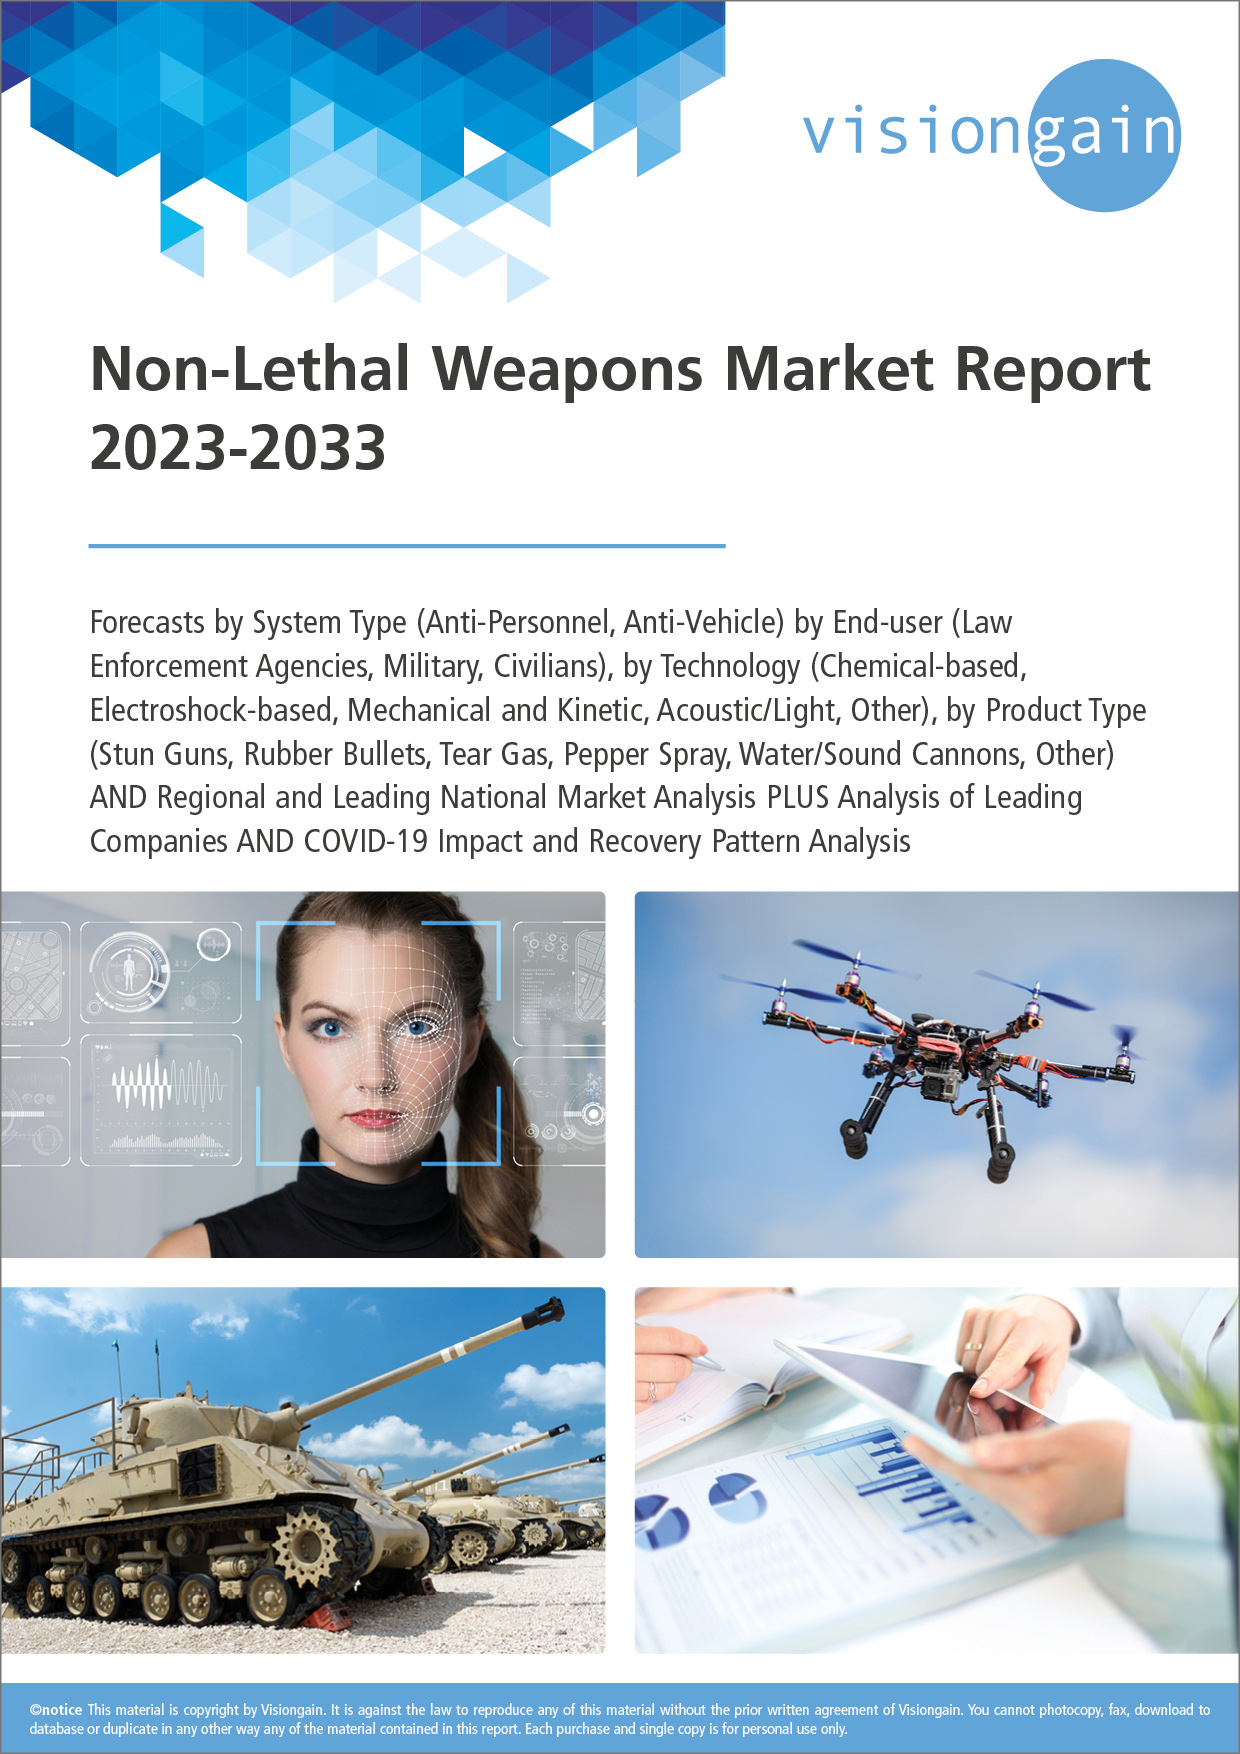 Non-Lethal Weapons Market Report 2023-2033